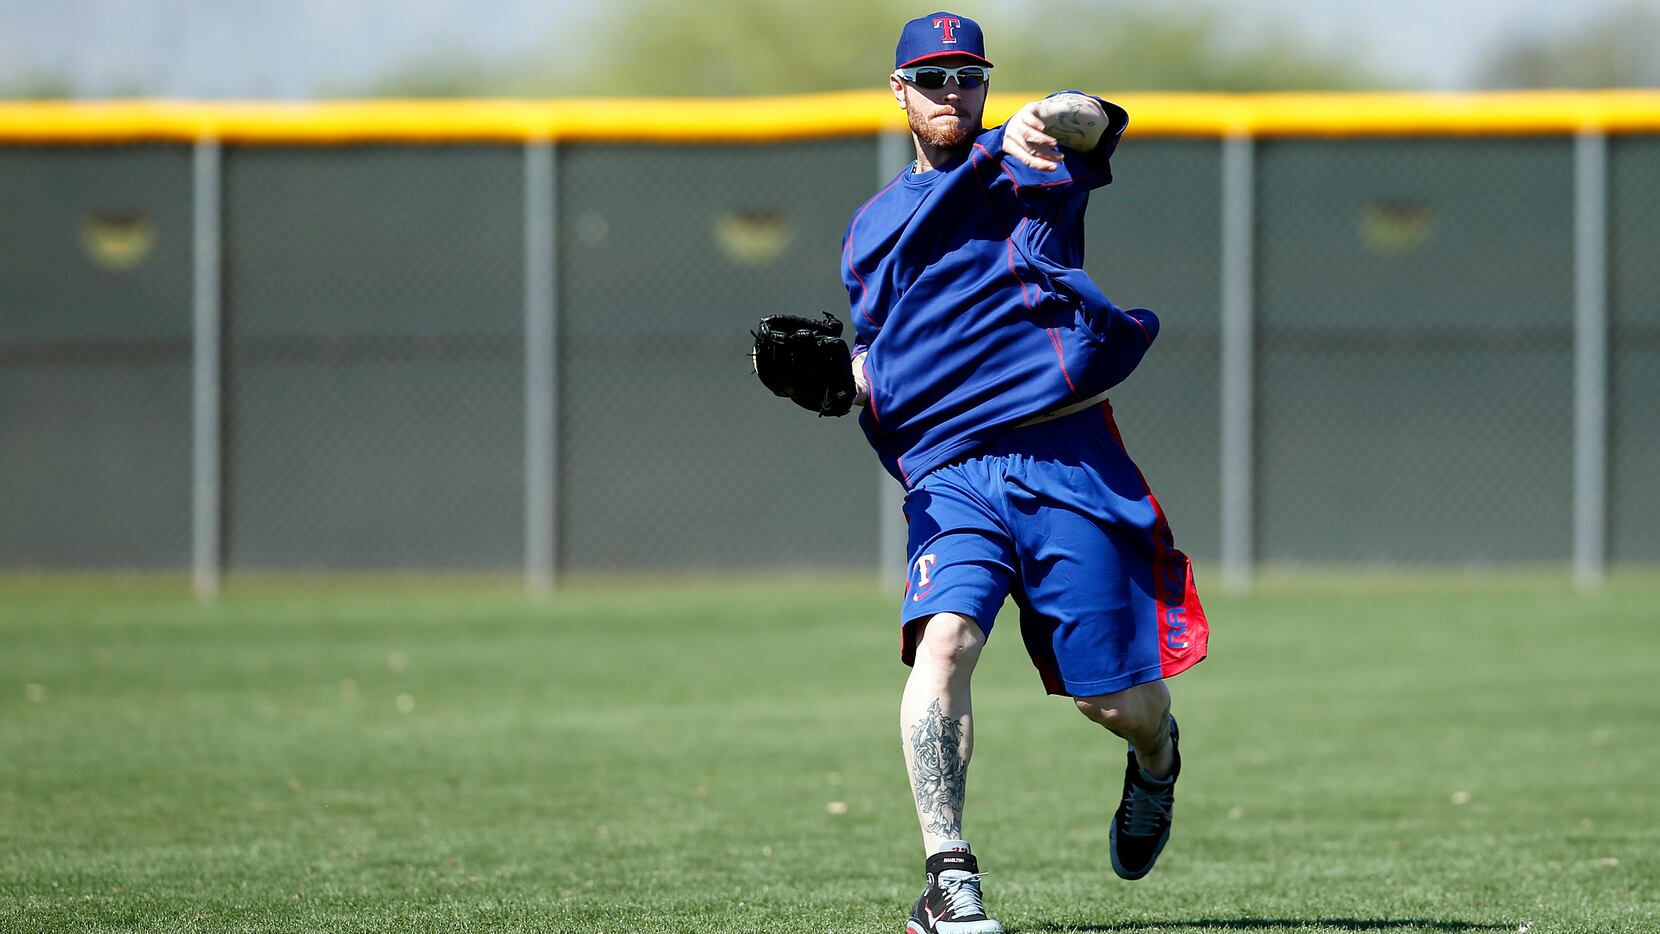 Josh Hamilton has first workout with Rangers, appreciates chance